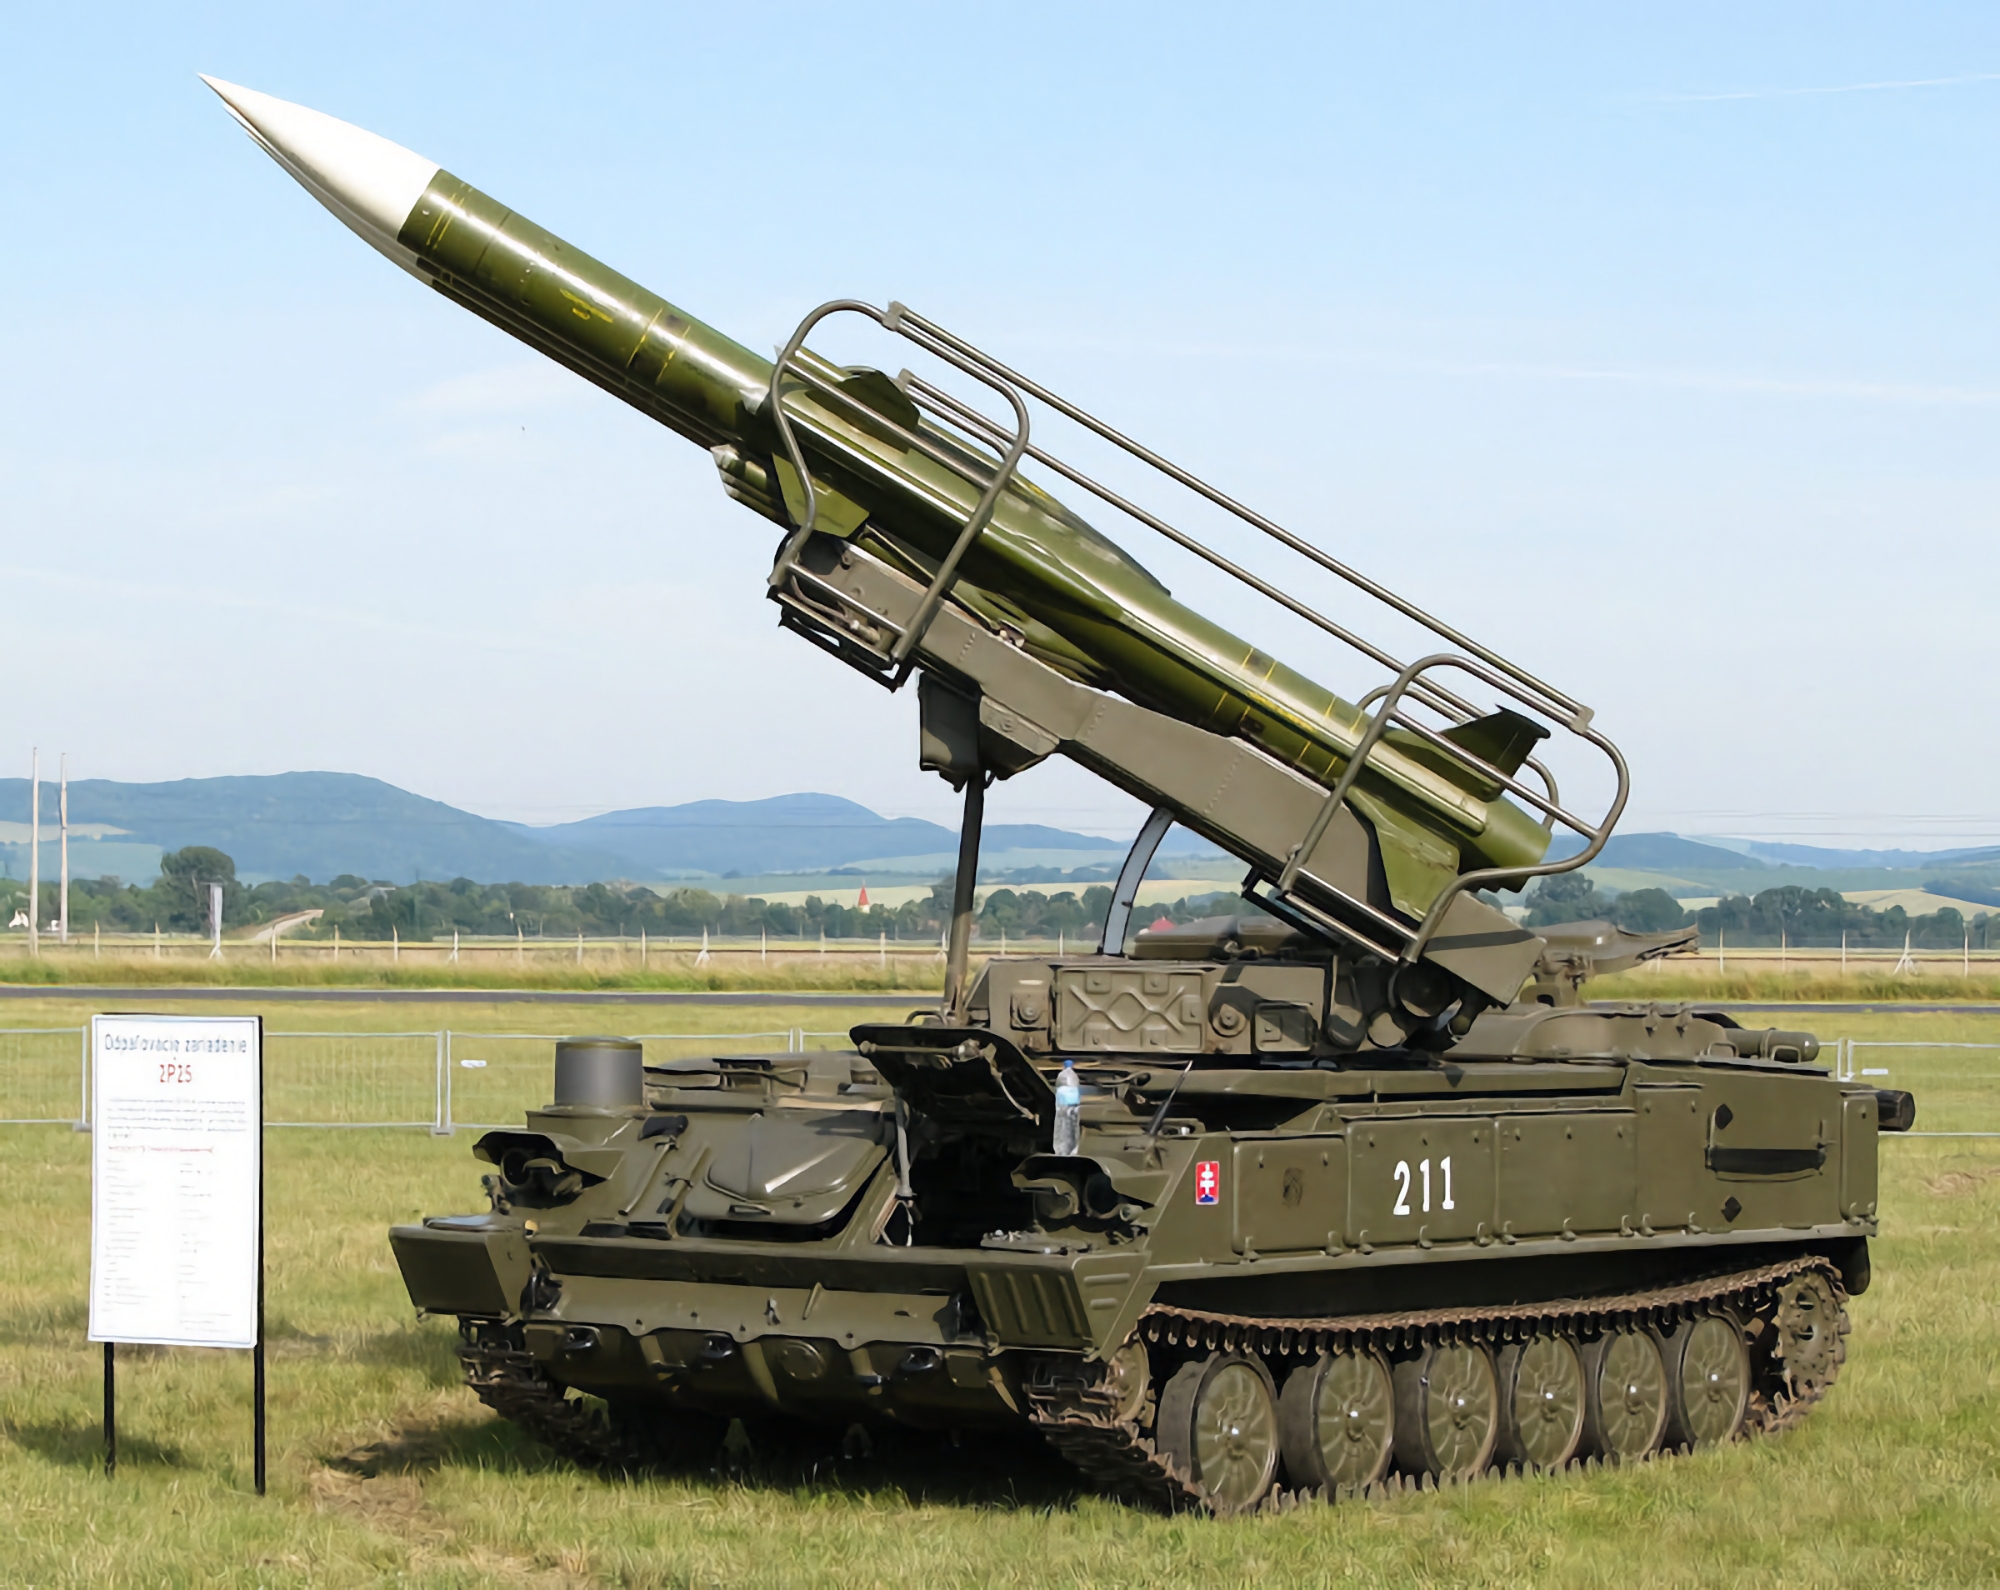 Not just MiG-29 fighters: Slovakia to give Ukraine 2K12 "Kub" surface-to-air missile systems